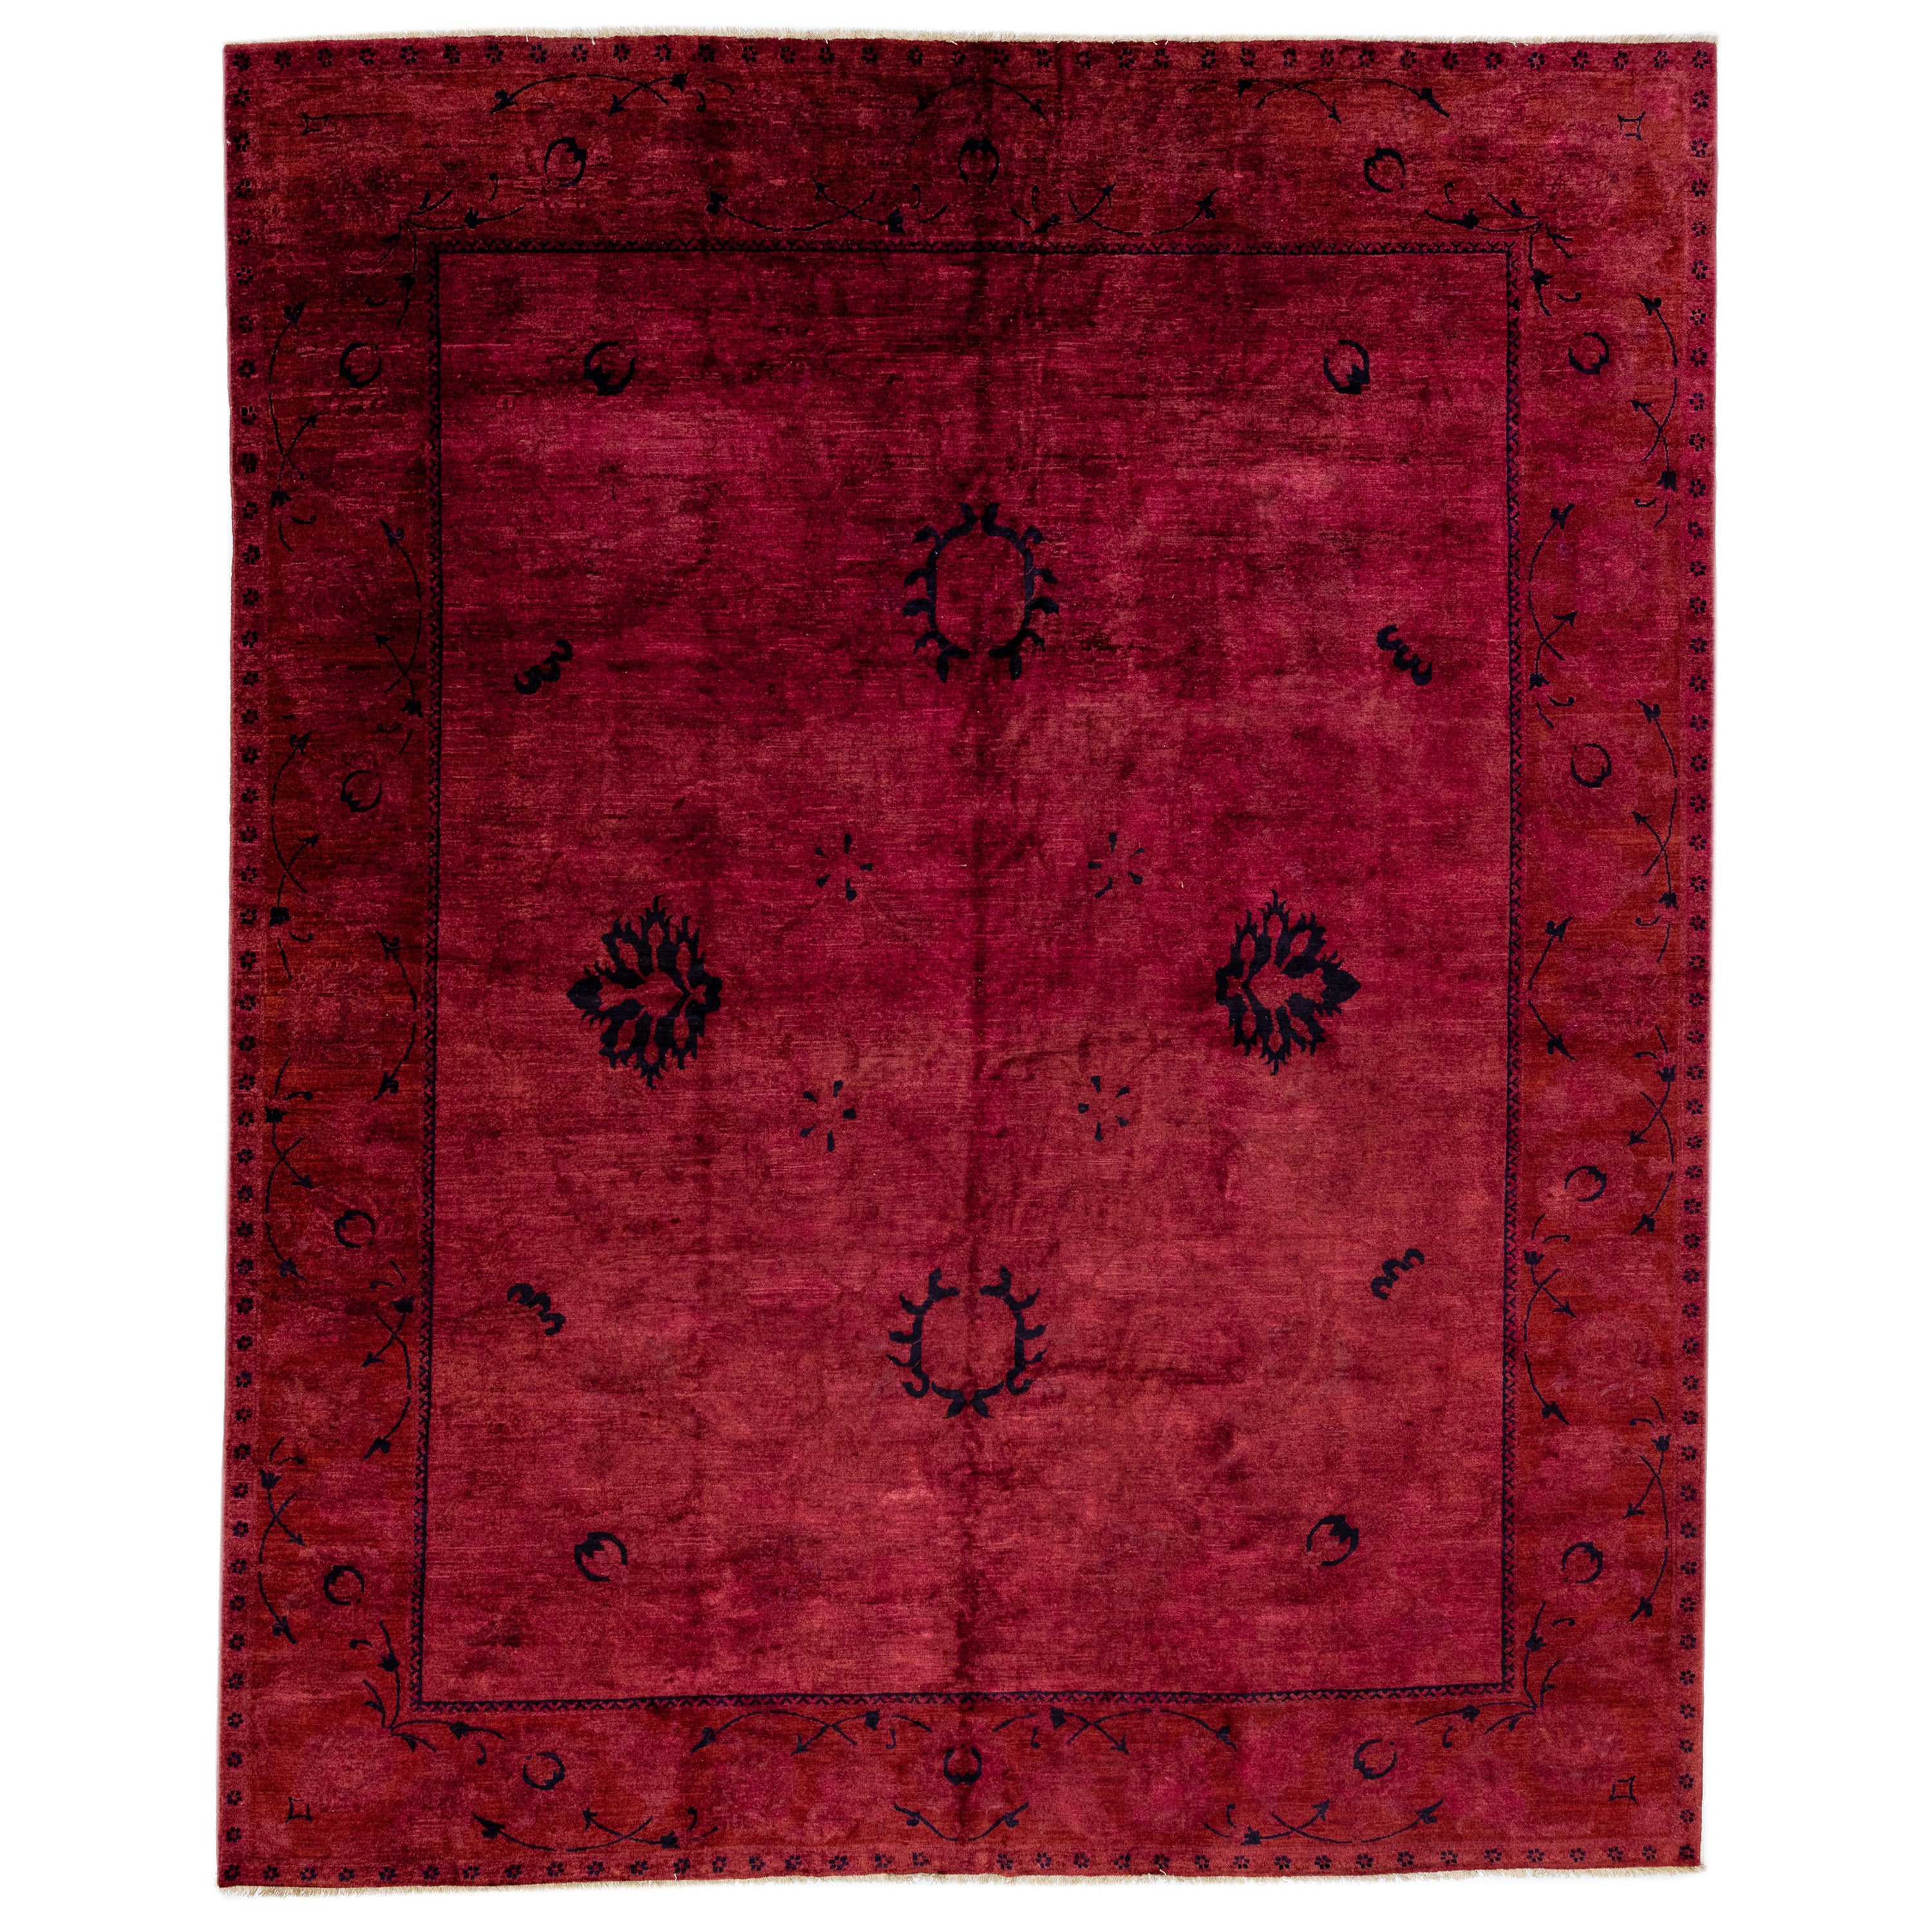 Handmade Transitional Wool Rug with Floral Motif in Red